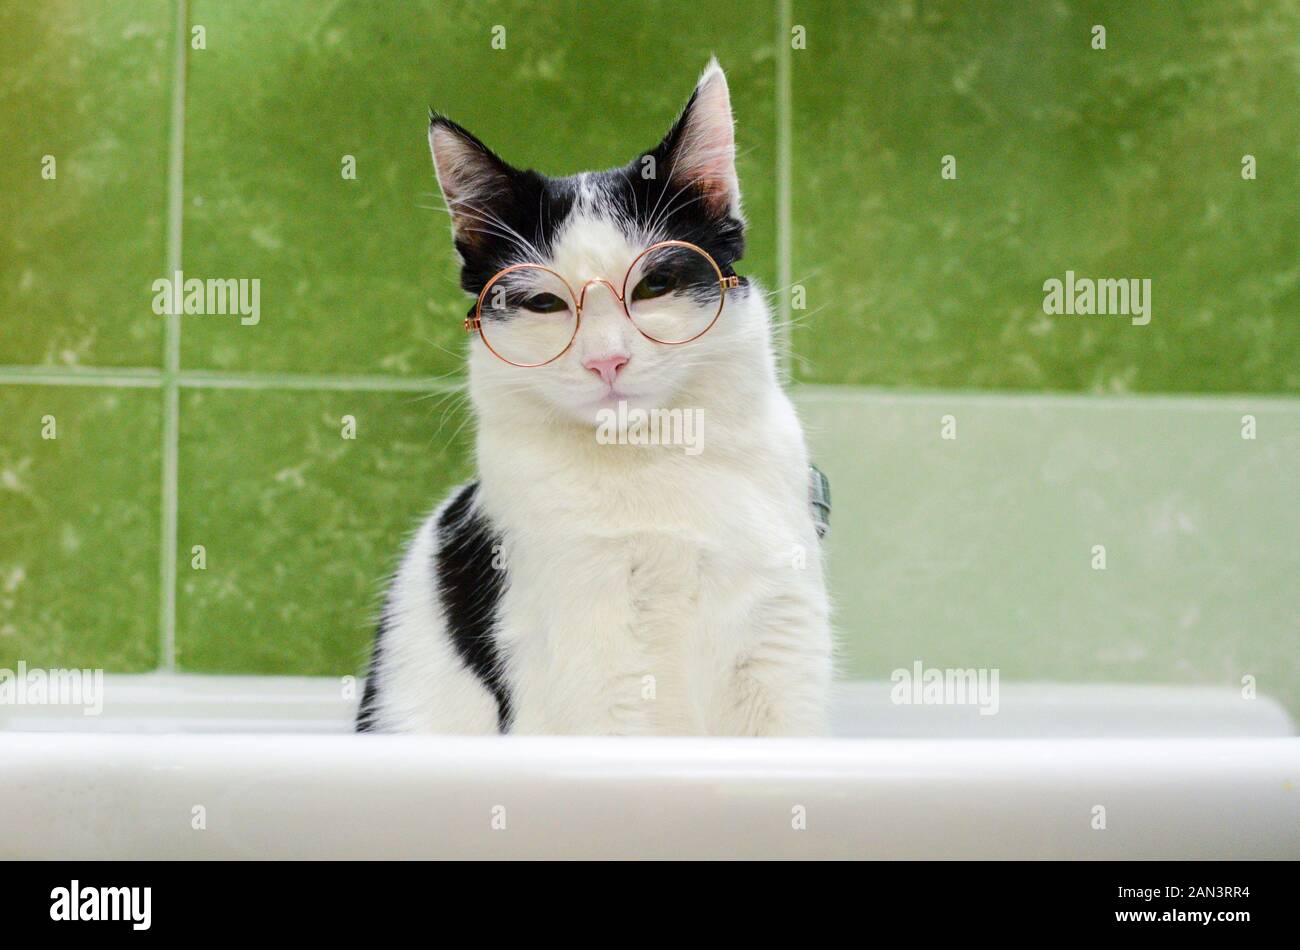 Bicolor cat with glasses judging you Stock Photo